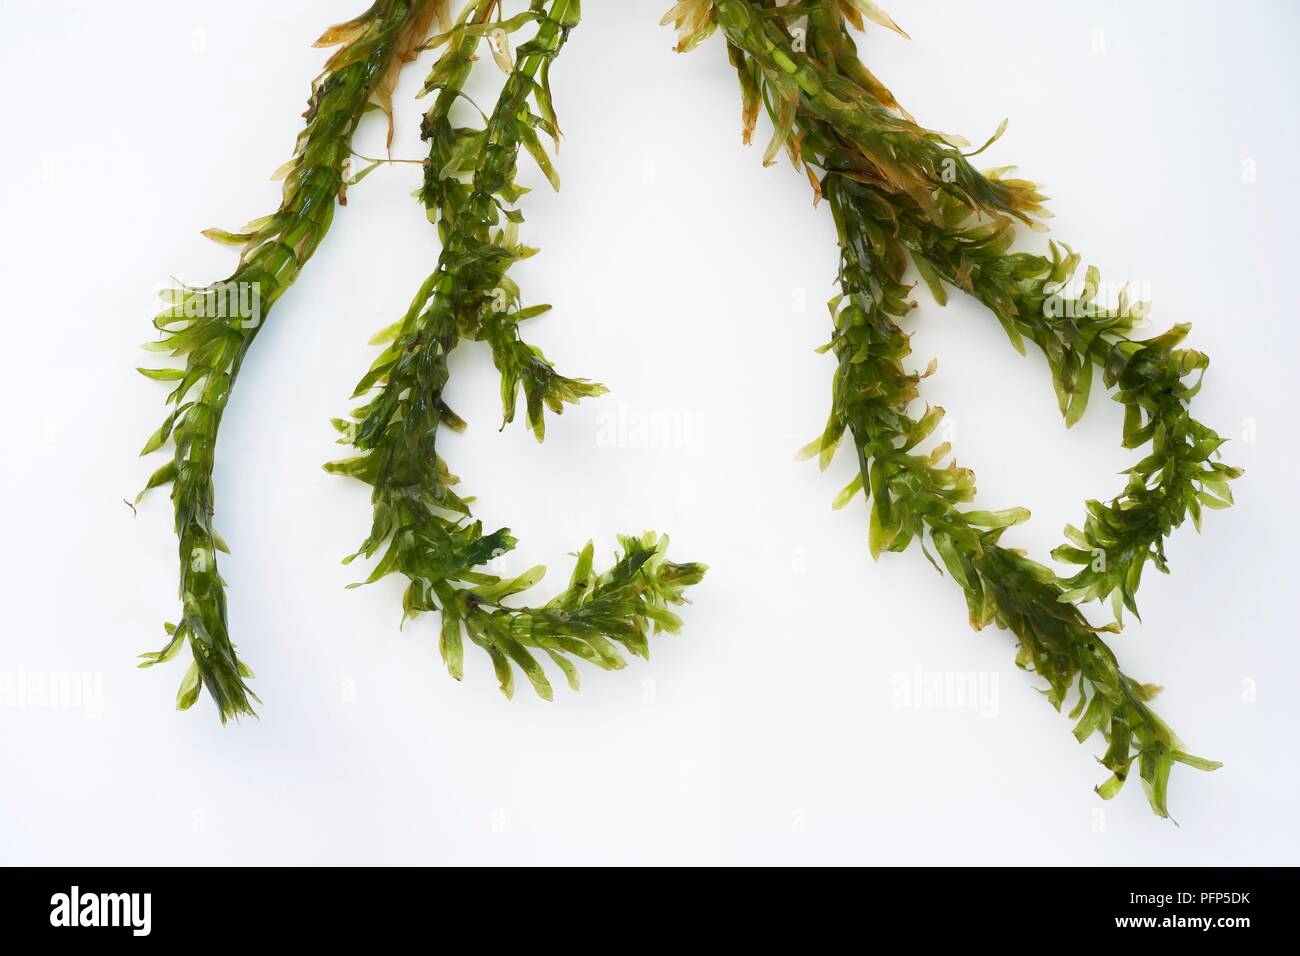 Pond weed Stock Photo